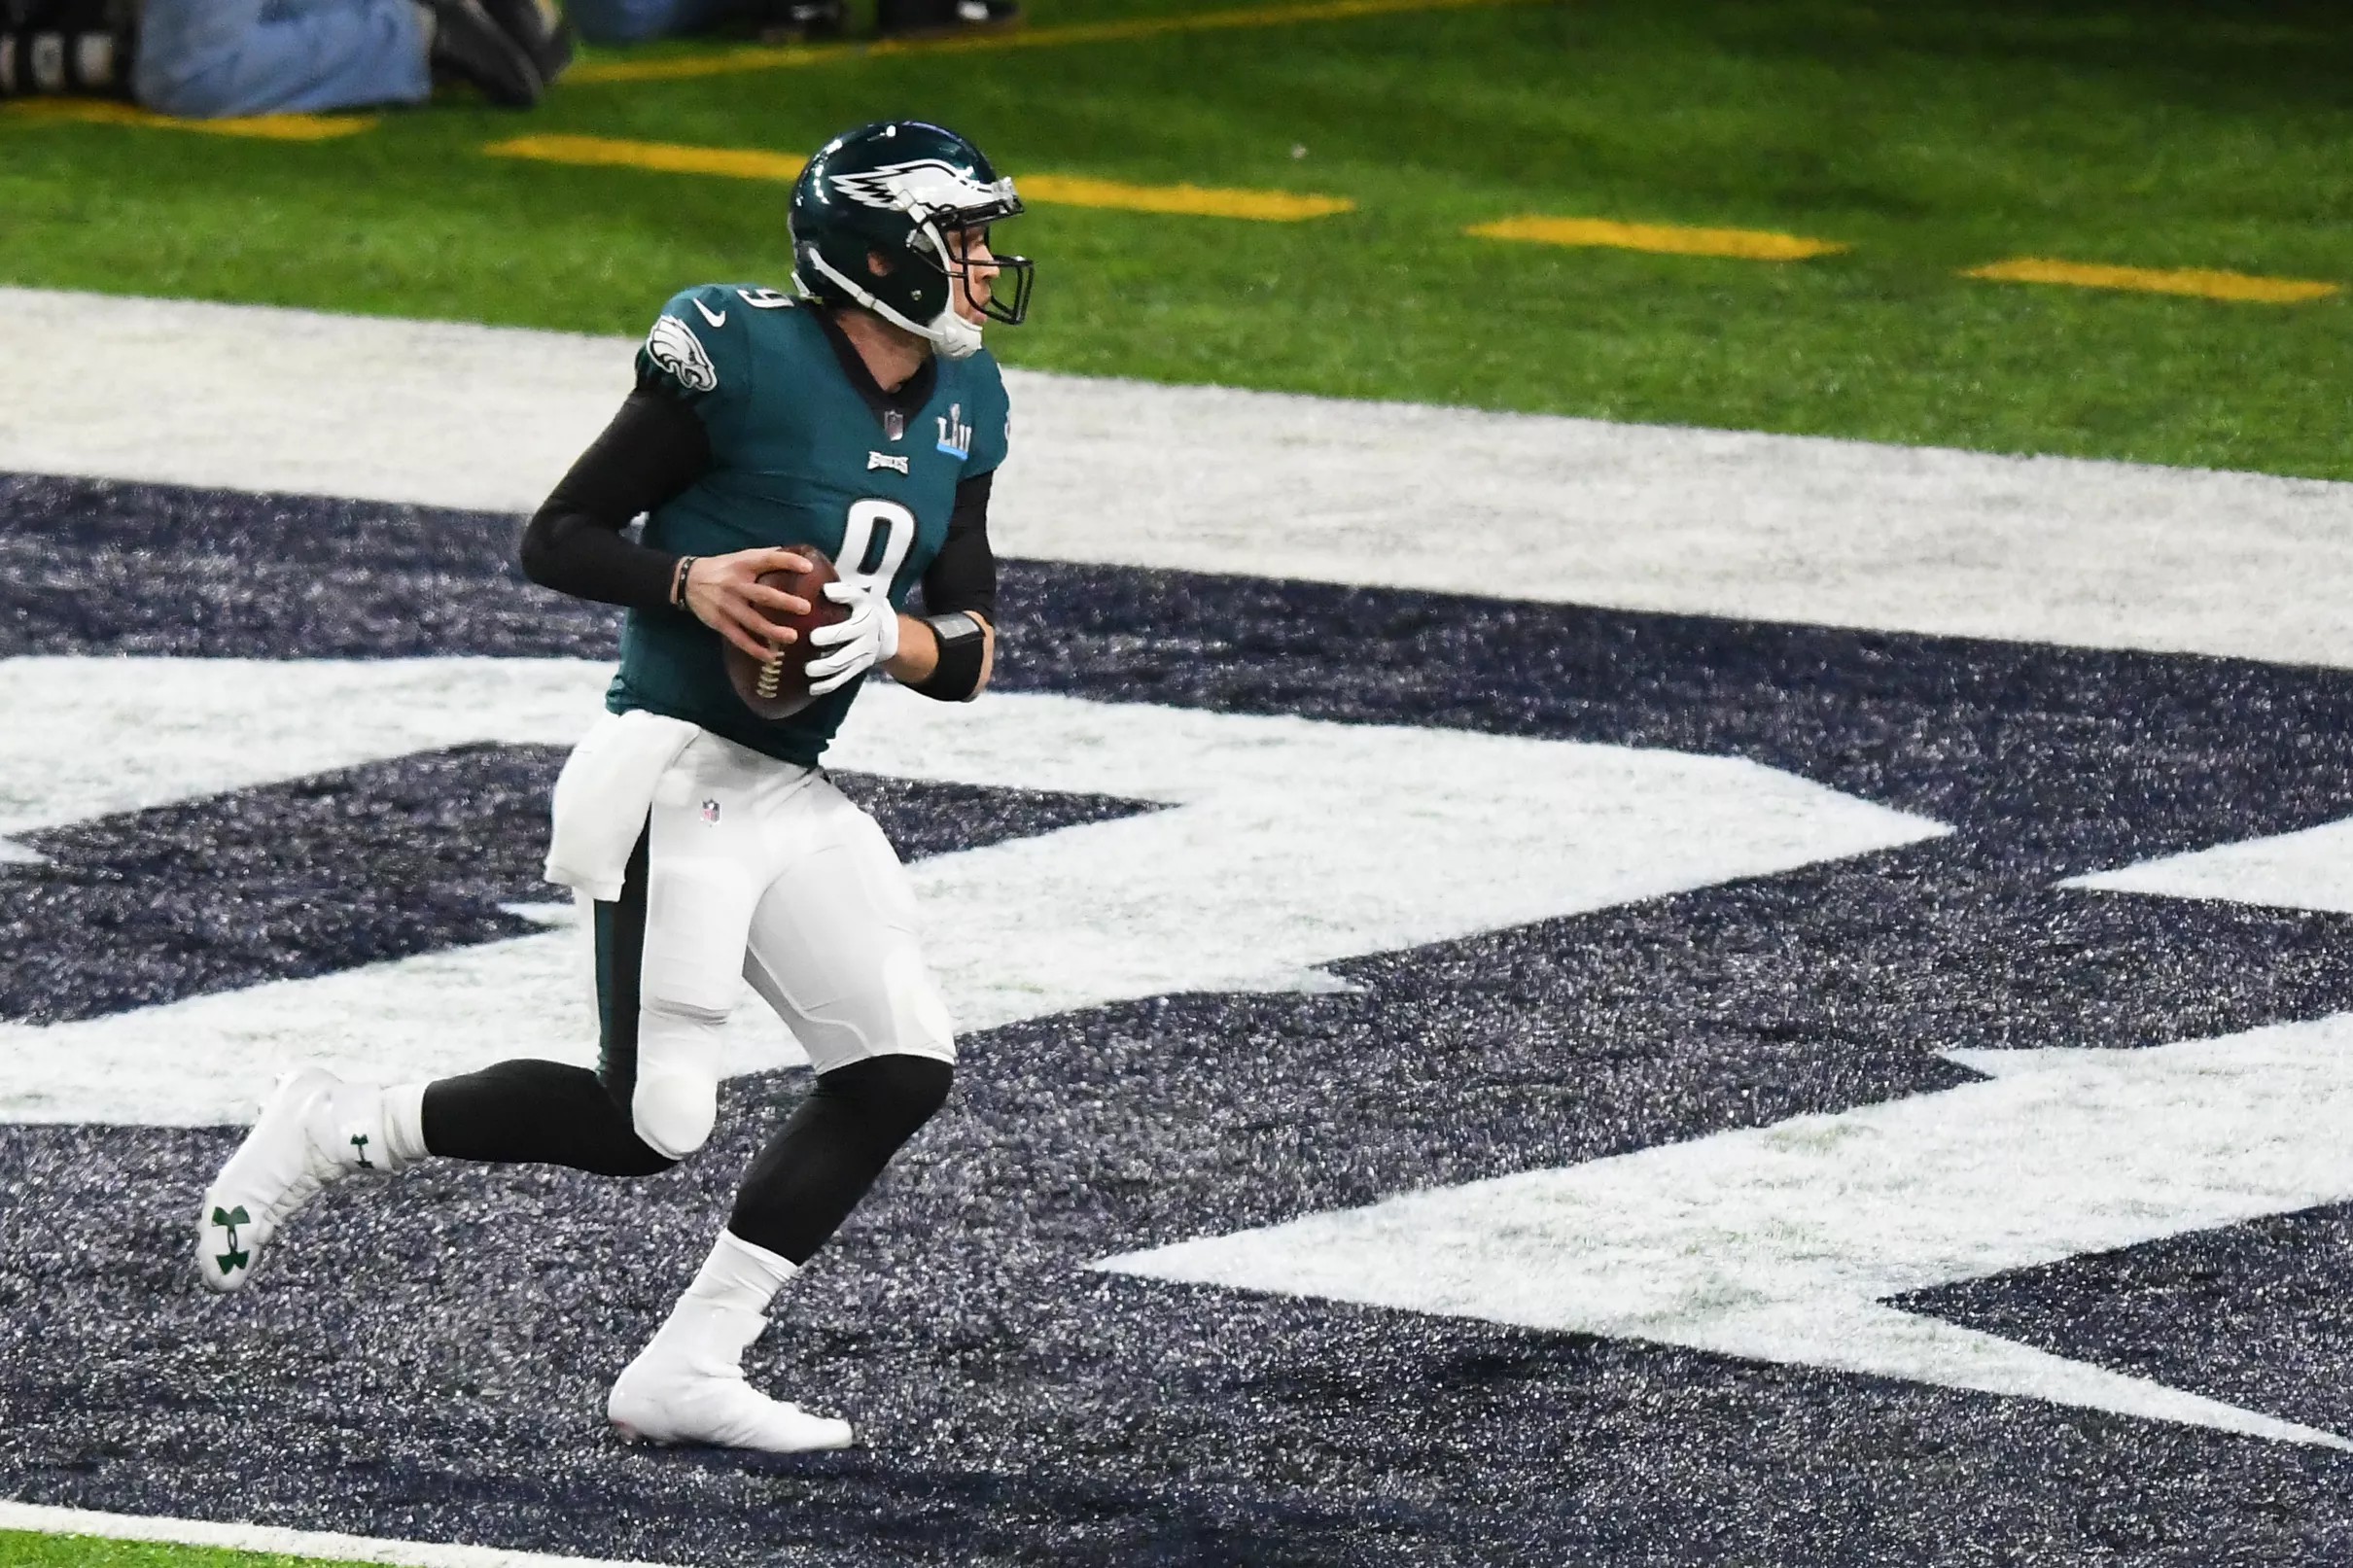 Eagles prepared for the Patriots to potentially cheat in the Super Bowl